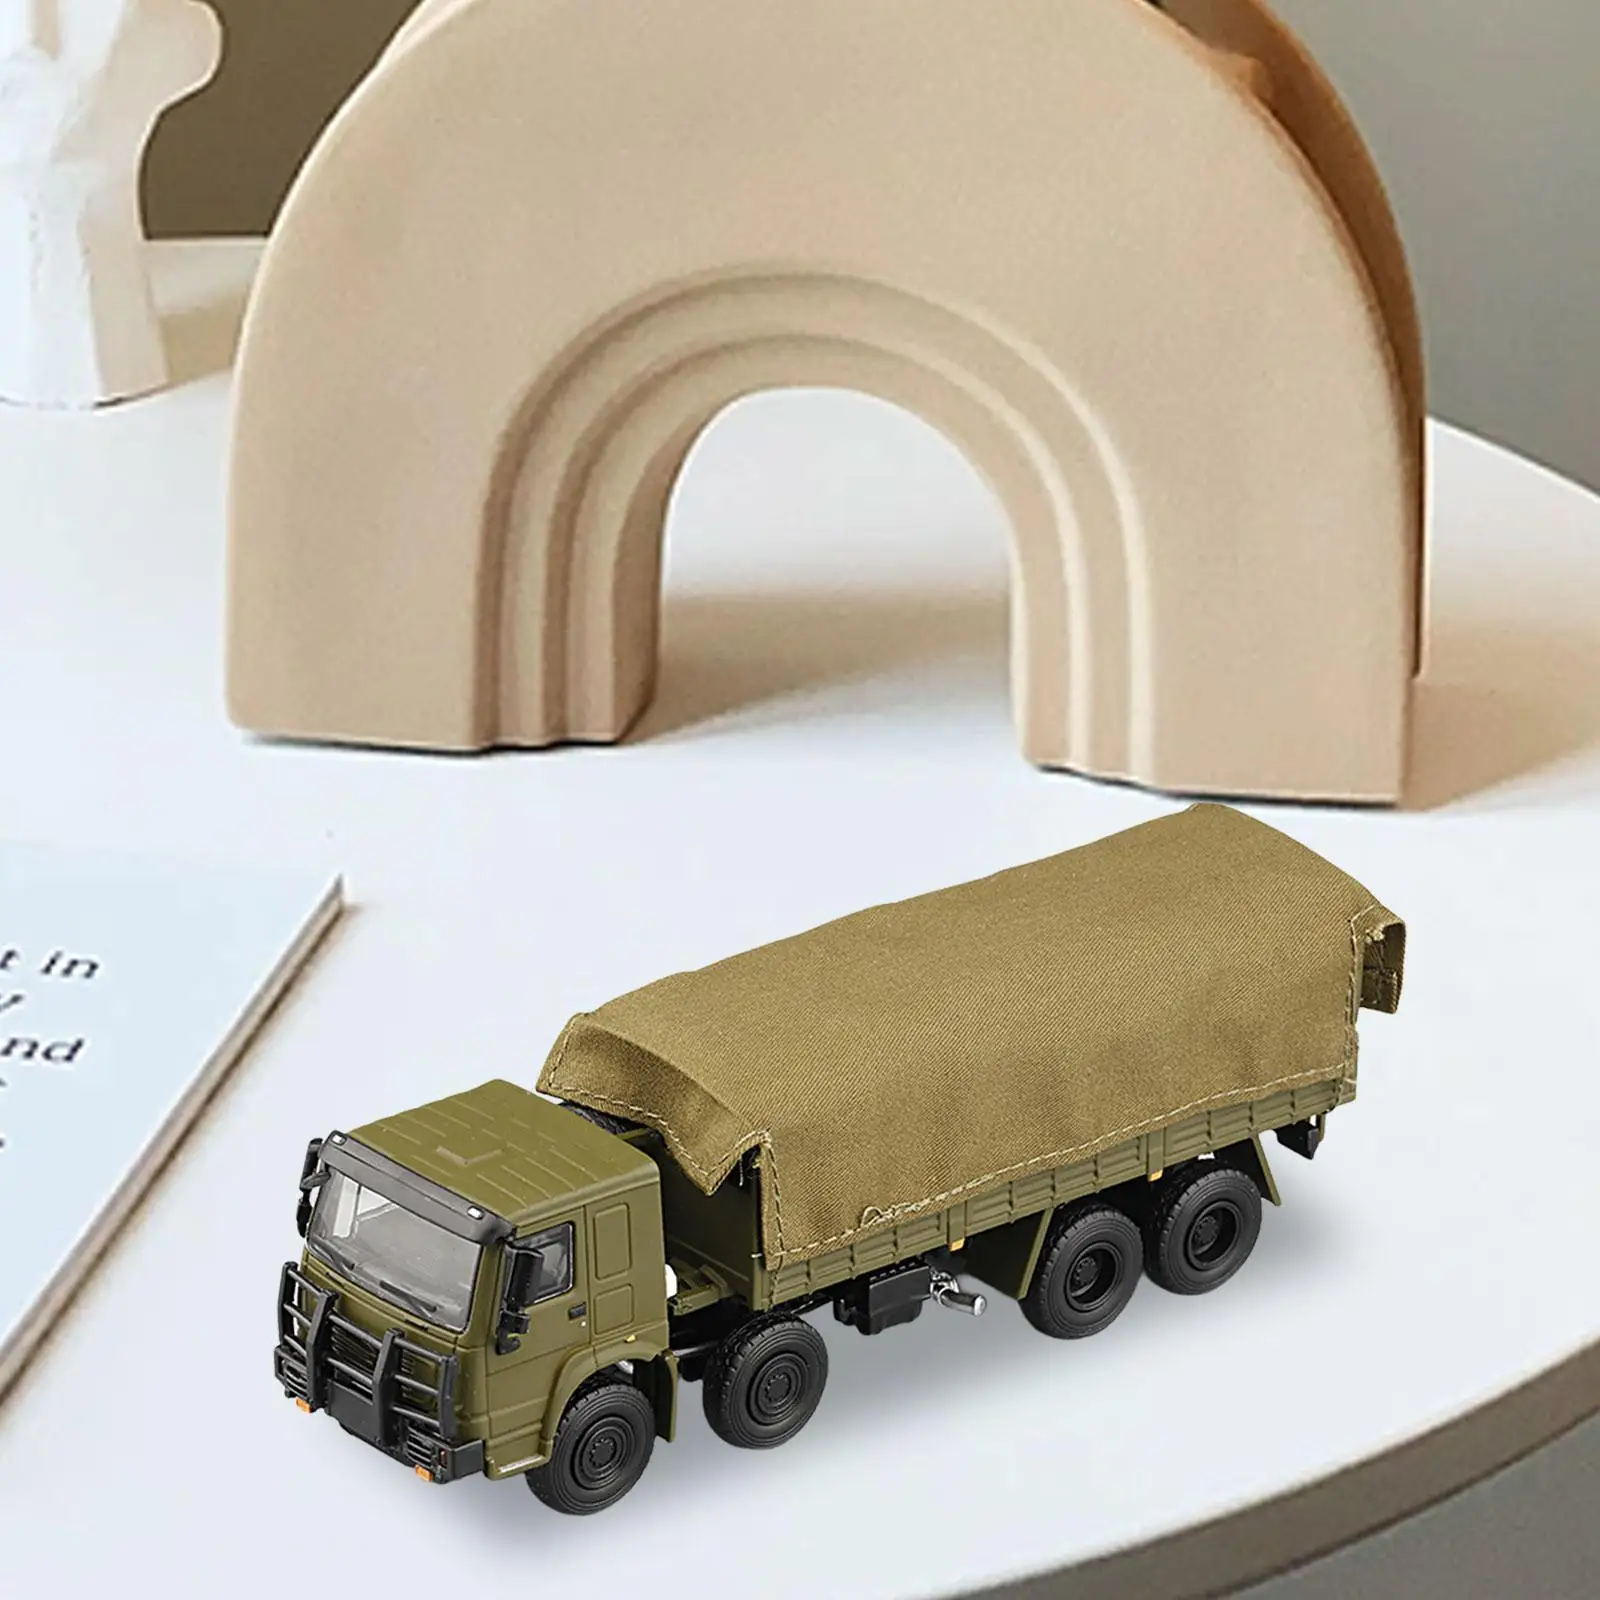 1/64 Realistic Car Vehicles Diecast Toys Children Gifts Collectibles for Diorama Miniature Scene Photography Props Accessories